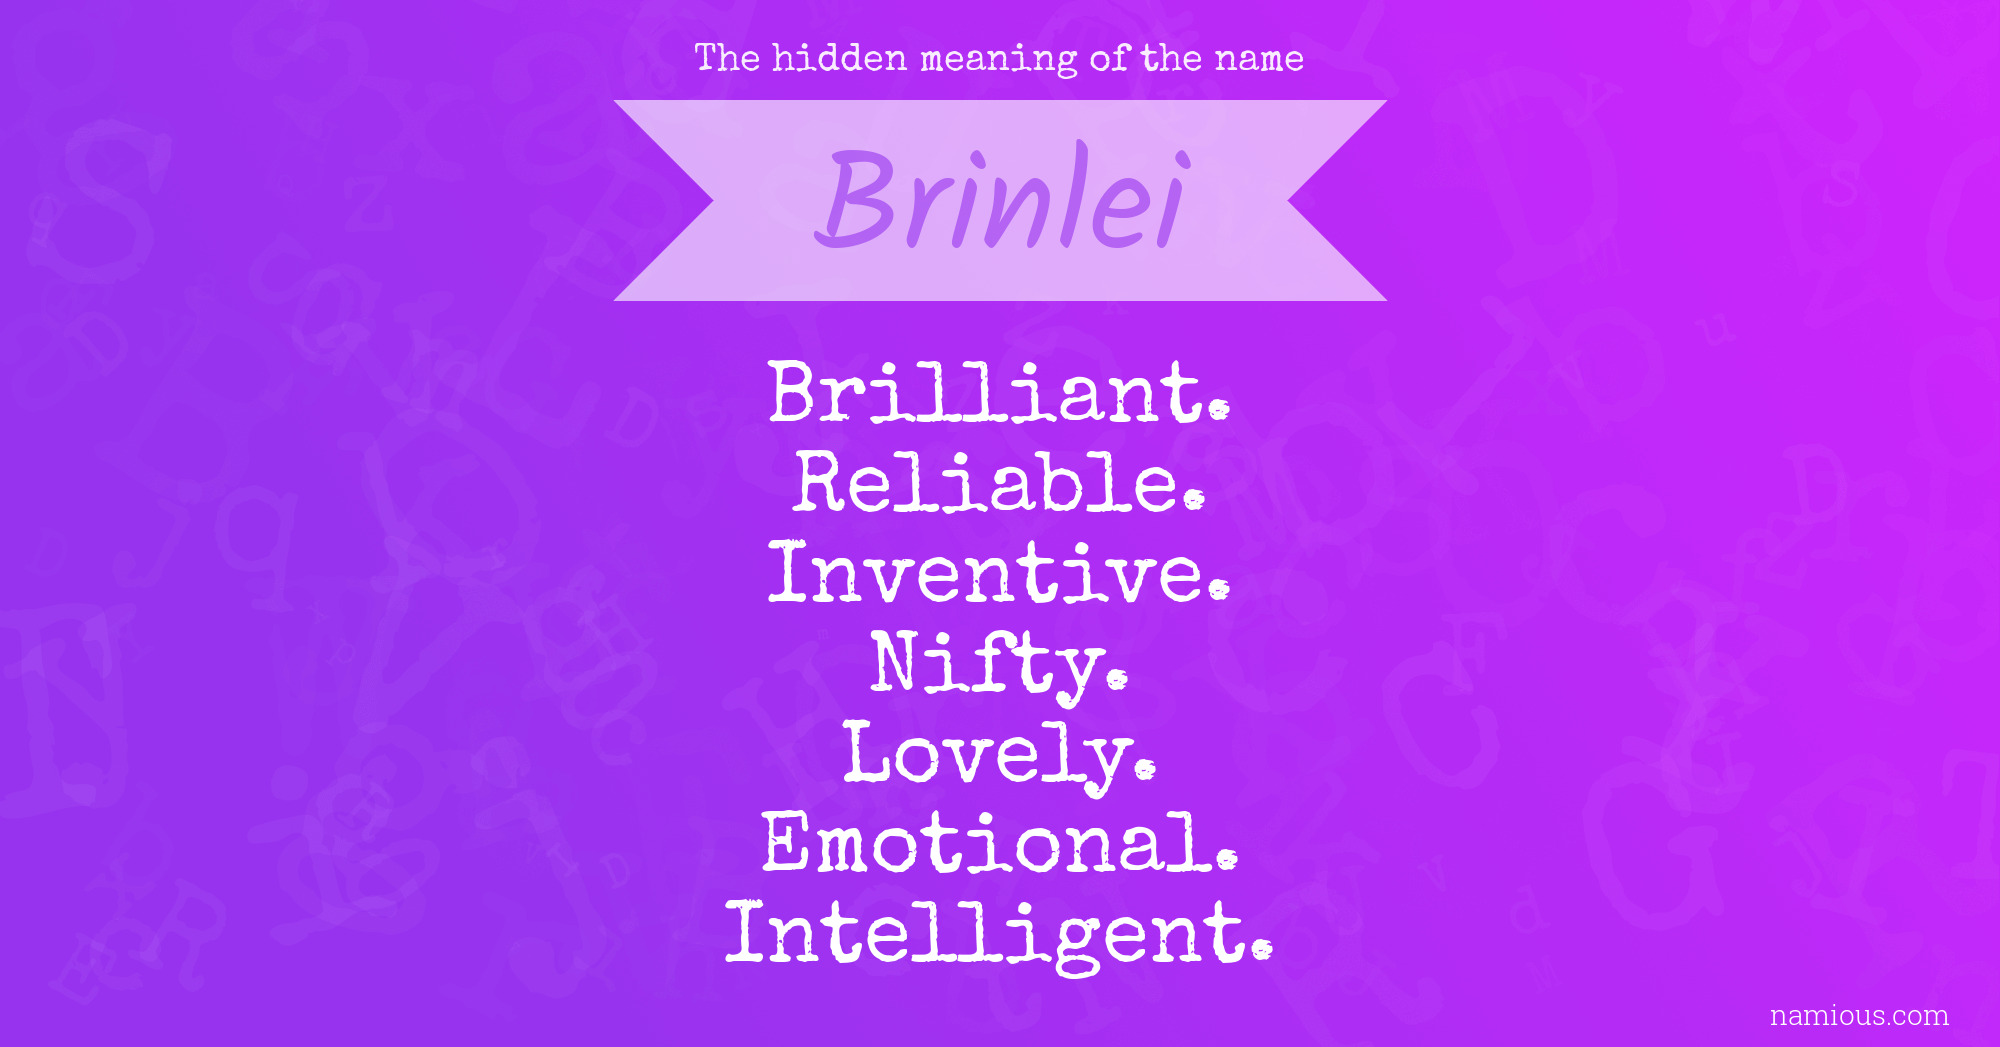 The hidden meaning of the name Brinlei